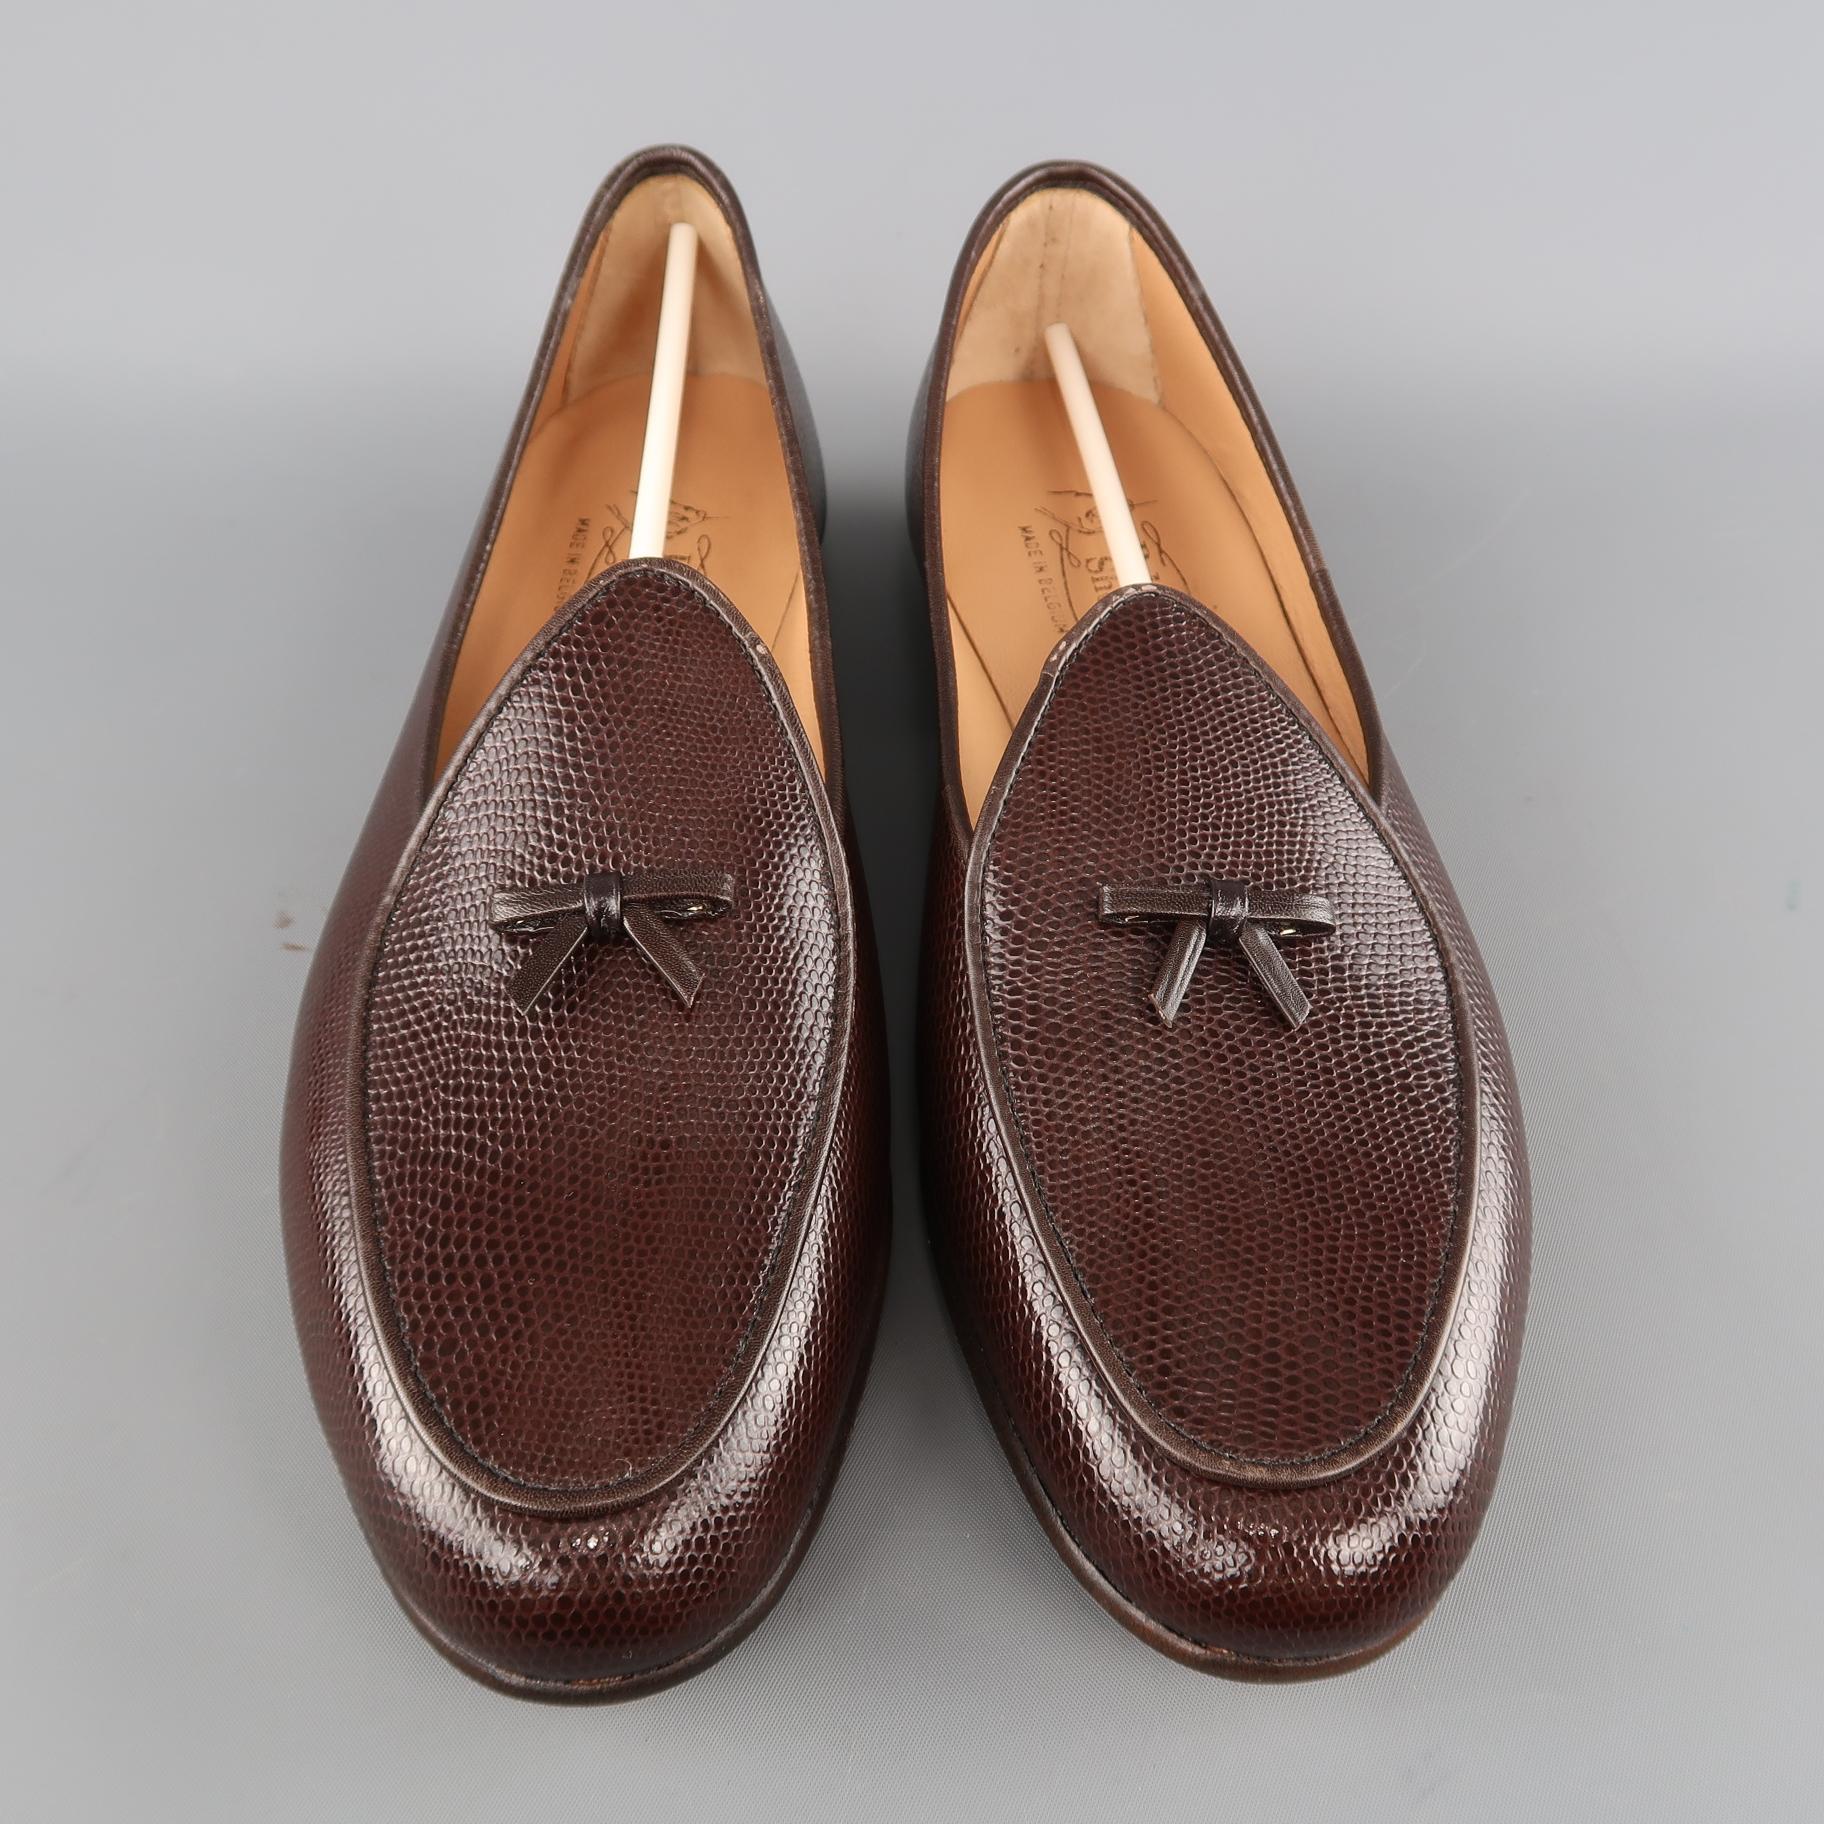 BELGIAN SHOES loafers come in lizard textured embossed leather with a bow detailed apron toe. Made in Belgium.
 
Brand New with Box.
Marked: 9 1/2 M
 
Outsole: 11.5 x 3.5 in.